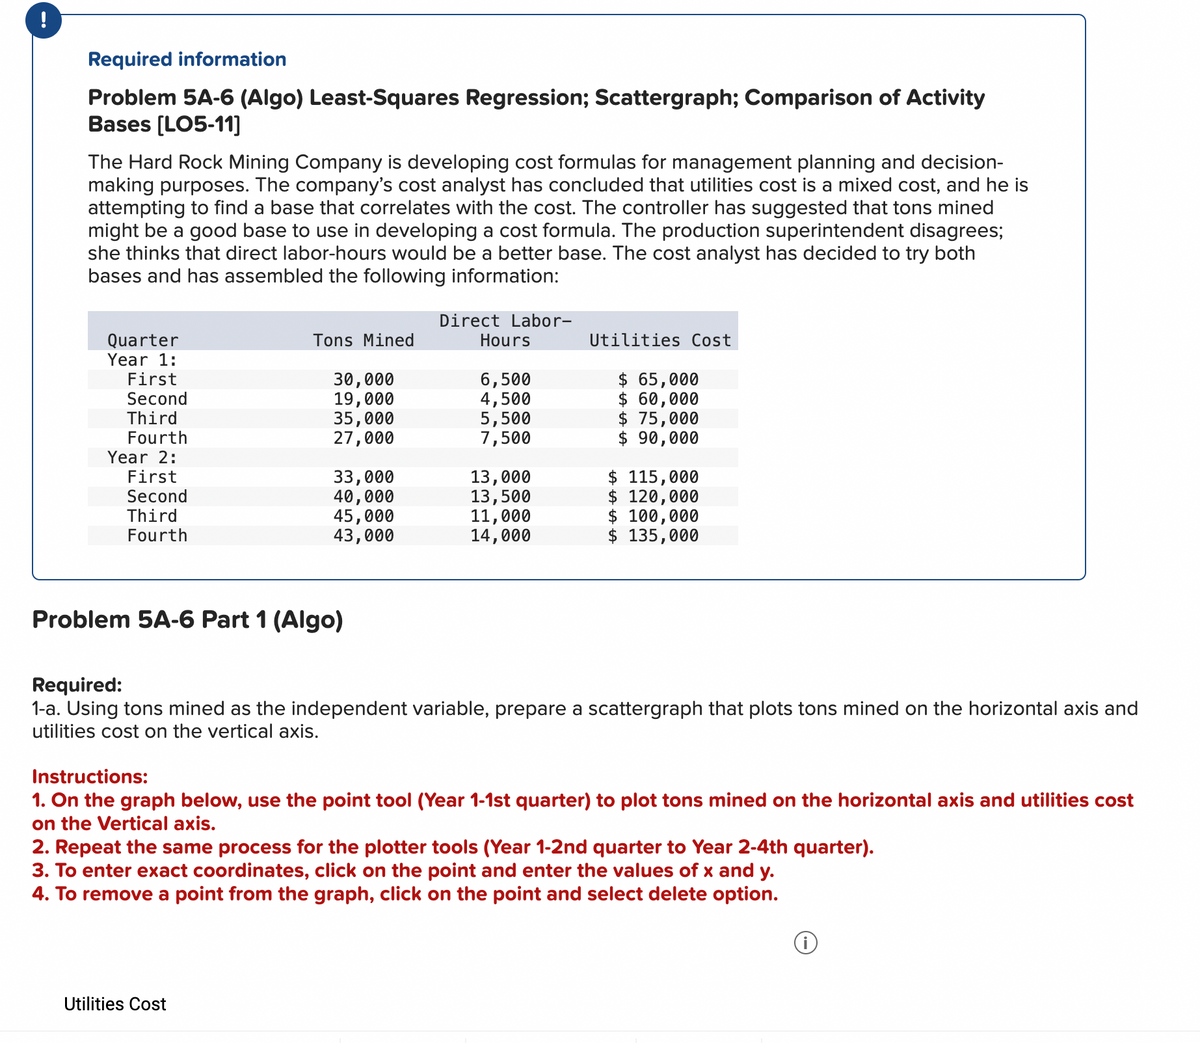 Required information
Problem 5A-6 (Algo) Least-Squares Regression; Scattergraph; Comparison of Activity
Bases [LO5-11]
The Hard Rock Mining Company is developing cost formulas for management planning and decision-
making purposes. The company's cost analyst has concluded that utilities cost is a mixed cost, and he is
attempting to find a base that correlates with the cost. The controller has suggested that tons mined
might be a good base to use in developing a cost formula. The production superintendent disagrees;
she thinks that direct labor-hours would be a better base. The cost analyst has decided to try both
bases and has assembled the following information:
Direct Labor-
Quarter
Year 1:
First
Tons Mined
Hours
Utilities Cost
30,000
6,500
$ 65,000
Second
19,000
4,500
$ 60,000
Third
35,000
5,500
$ 75,000
Fourth
27,000
7,500
$ 90,000
Year 2:
First
33,000
13,000
$ 115,000
Second
40,000
13,500
$ 120,000
Third
45,000
11,000
$ 100,000
Fourth
43,000
14,000
$ 135,000
Problem 5A-6 Part 1 (Algo)
Required:
1-a. Using tons mined as the independent variable, prepare a scattergraph that plots tons mined on the horizontal axis and
utilities cost on the vertical axis.
Instructions:
1. On the graph below, use the point tool (Year 1-1st quarter) to plot tons mined on the horizontal axis and utilities cost
on the Vertical axis.
2. Repeat the same process for the plotter tools (Year 1-2nd quarter to Year 2-4th quarter).
3. To enter exact coordinates, click on the point and enter the values of x and y.
4. To remove a point from the graph, click on the point and select delete option.
Utilities Cost